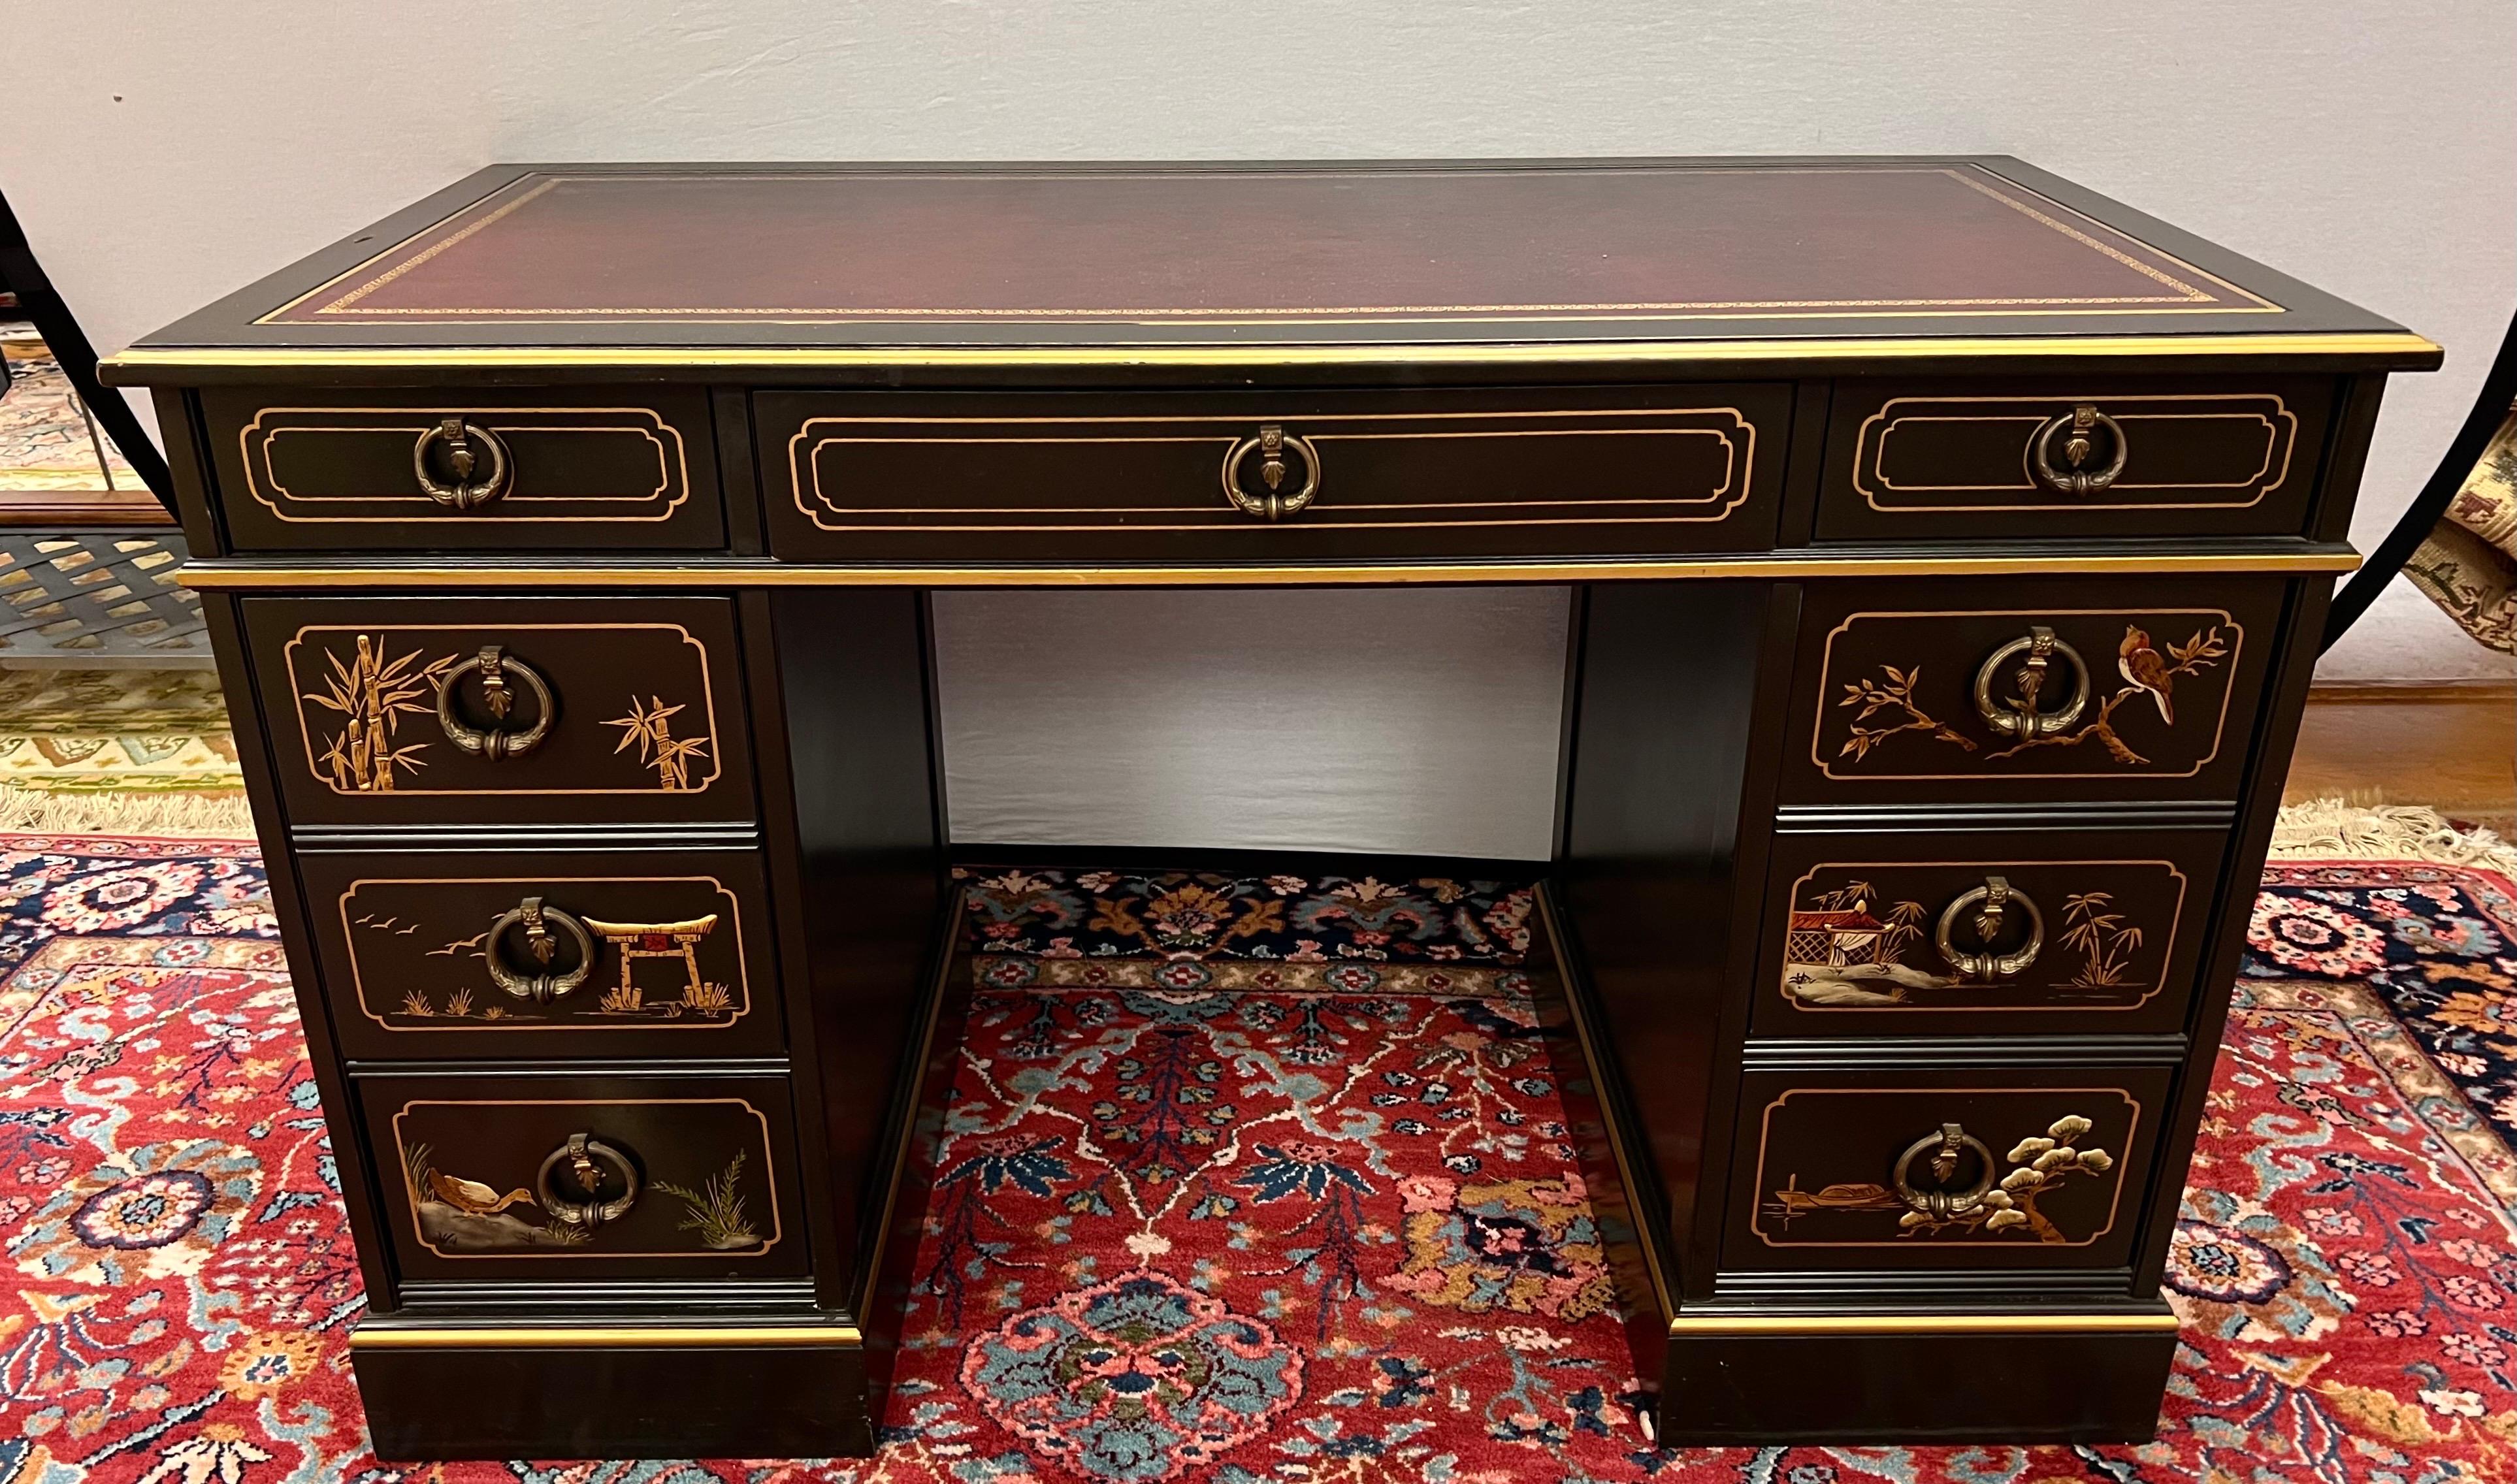 Beautiful chinoiserie black lacquered partners desk. Features a brown leather writing surface and multiple drawers on both sides. Handpainted scenes on the front and sides. Back is finished as well so it can float inside a room.